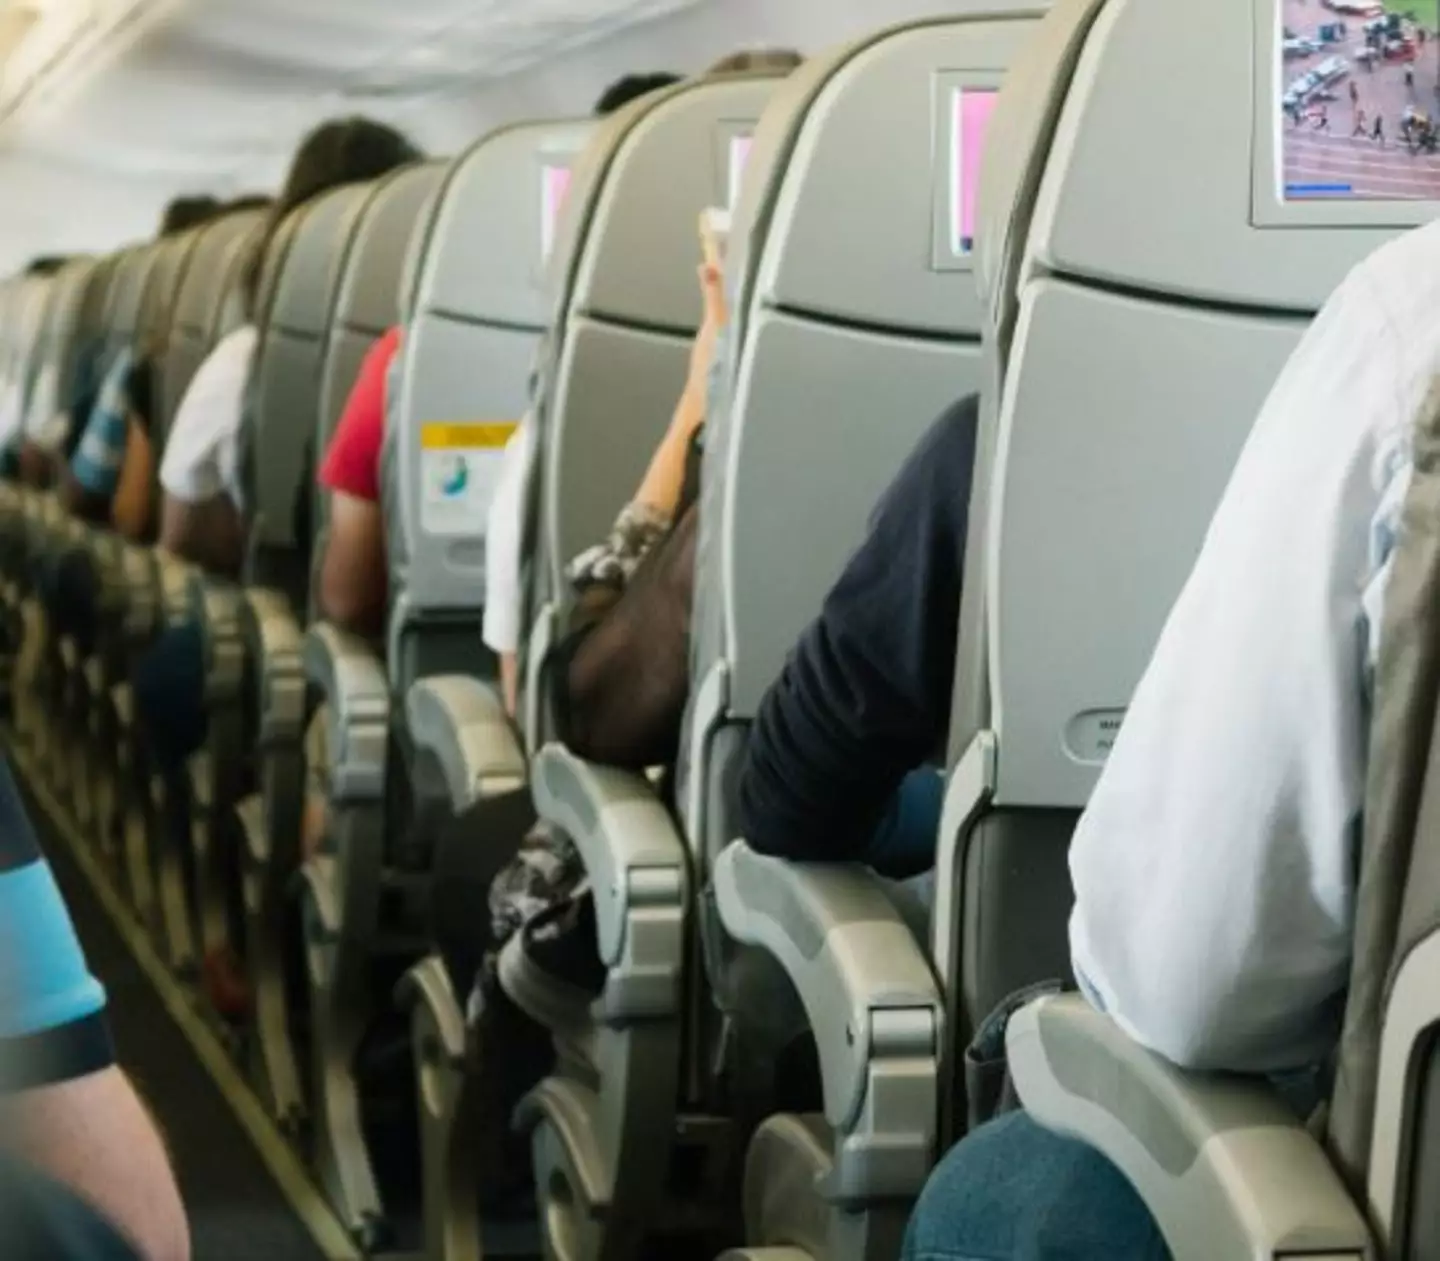 The airline says the policy can save up to two minutes on the time taken for passengers to get into their seats.